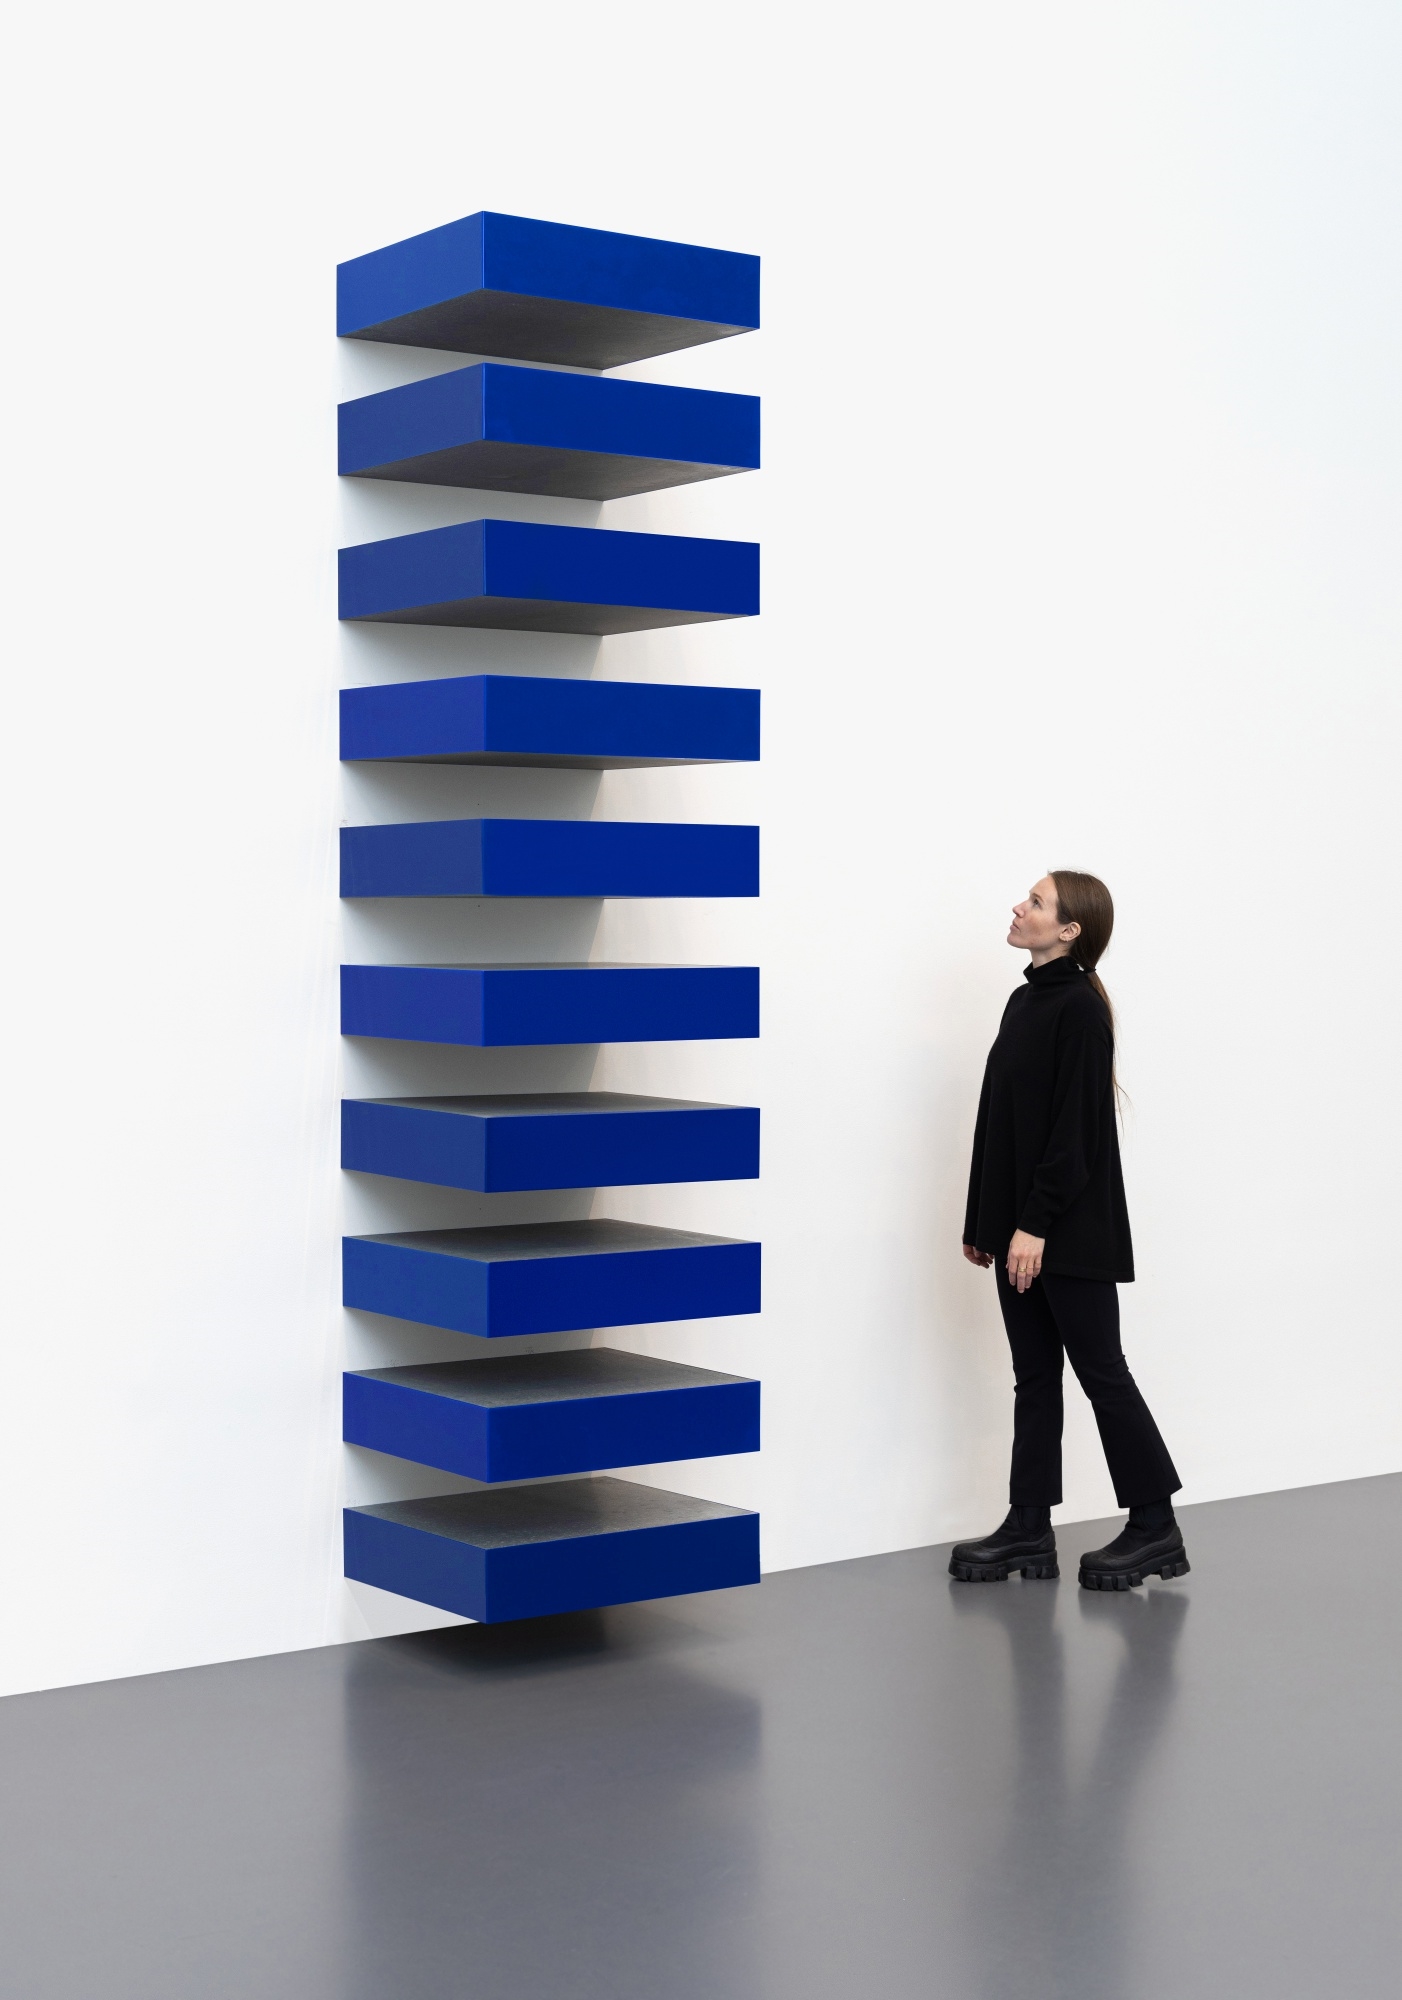 Artwork by Donald Judd, Untitled, Made of galvanized iron and opaque blue acrylic sheet, in ten parts